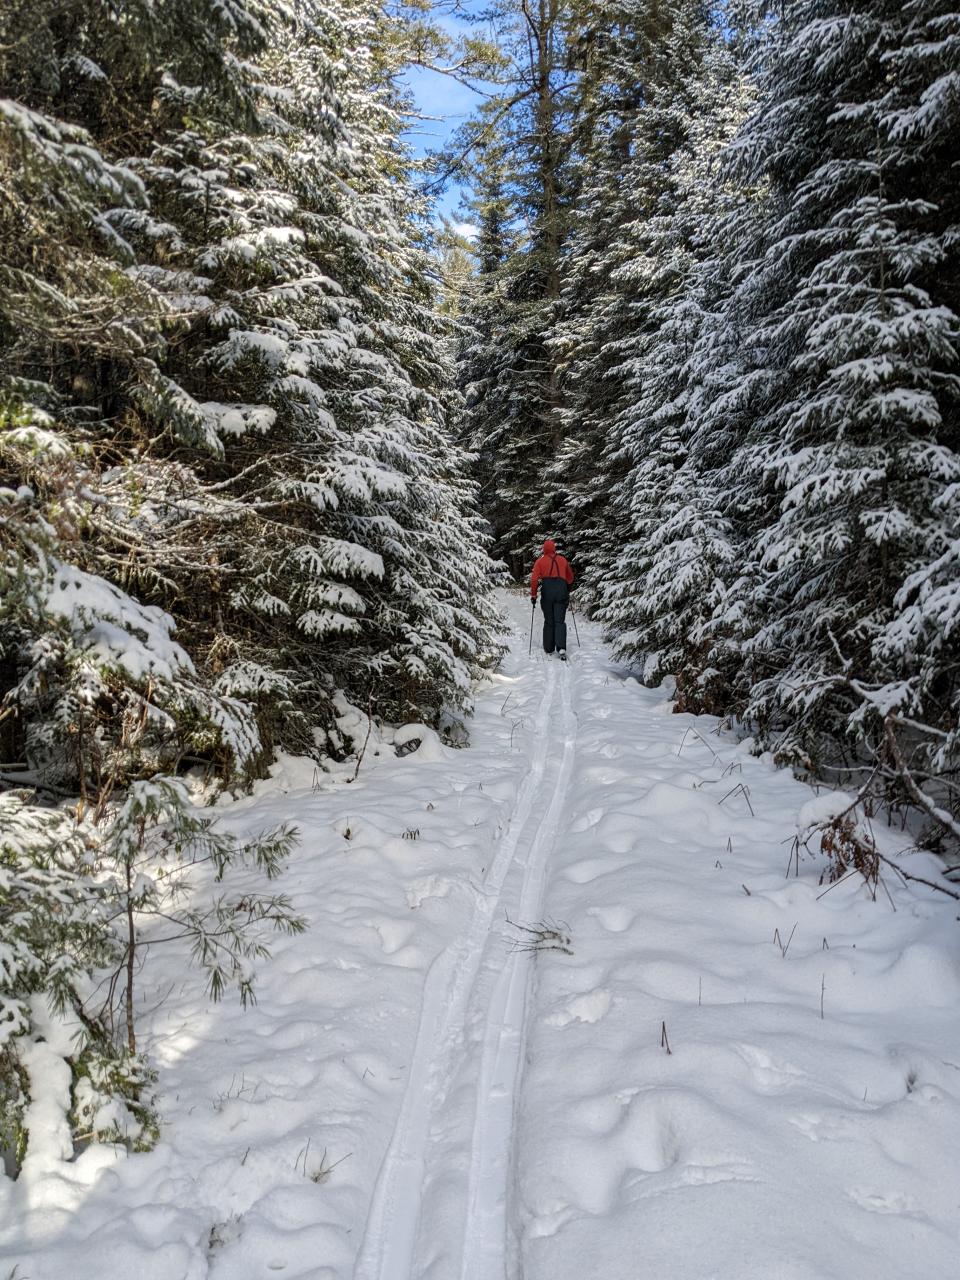 A person in a red jacket cross-country skis away from the camera in a dense, snowy wood.